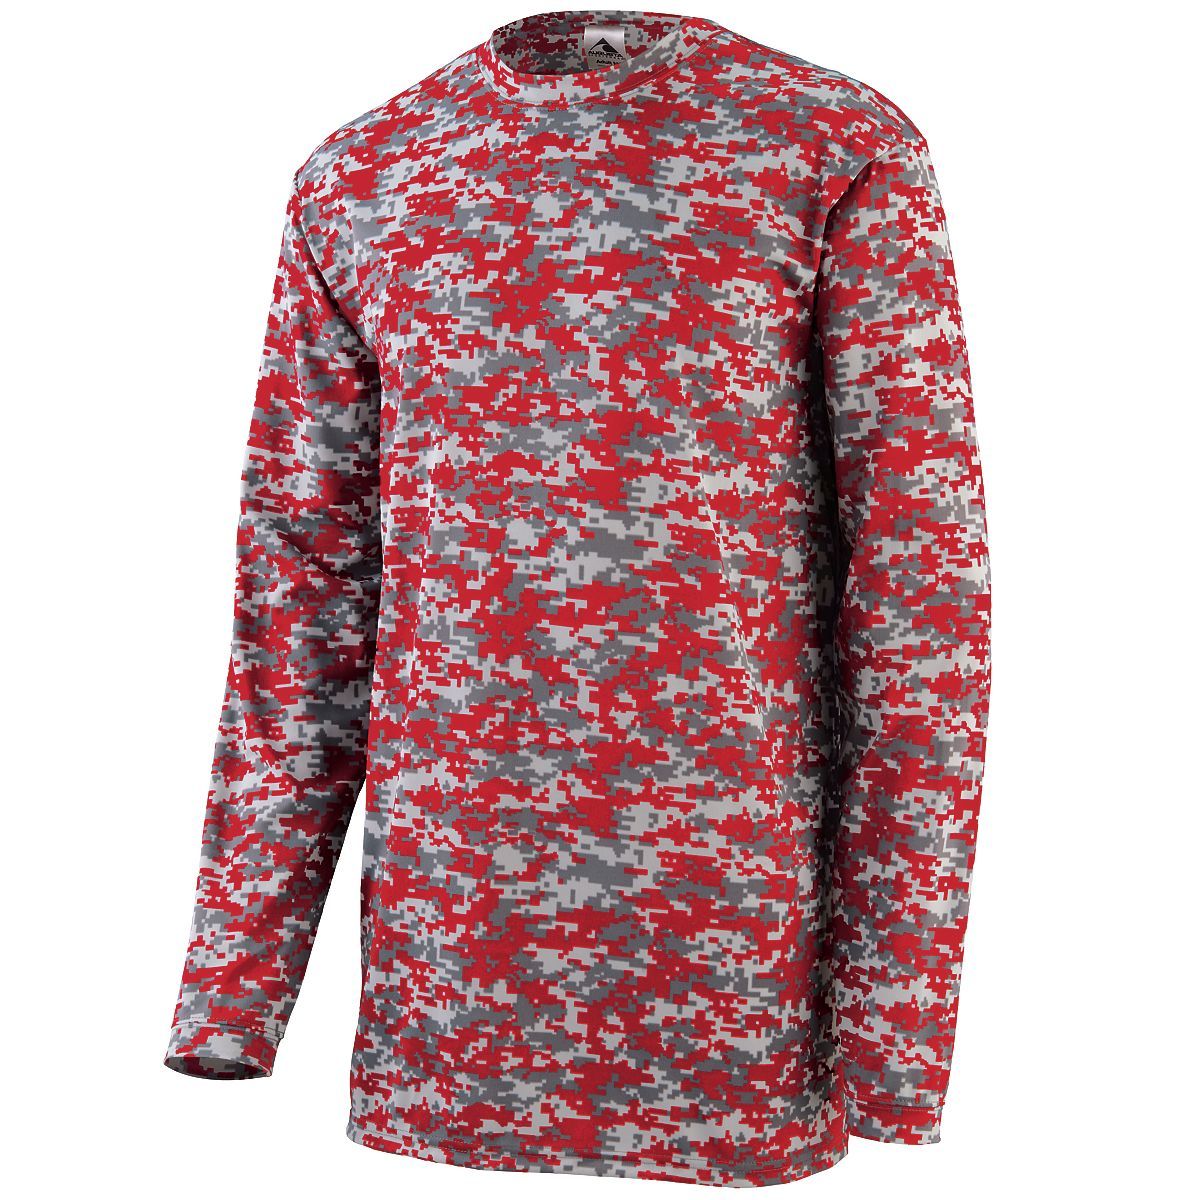 Augusta Sportswear Digi Camo Wicking Long Sleeve T-Shirt in Red Digi  -Part of the Adult, Adult-Tee-Shirt, T-Shirts, Augusta-Products, Shirts product lines at KanaleyCreations.com